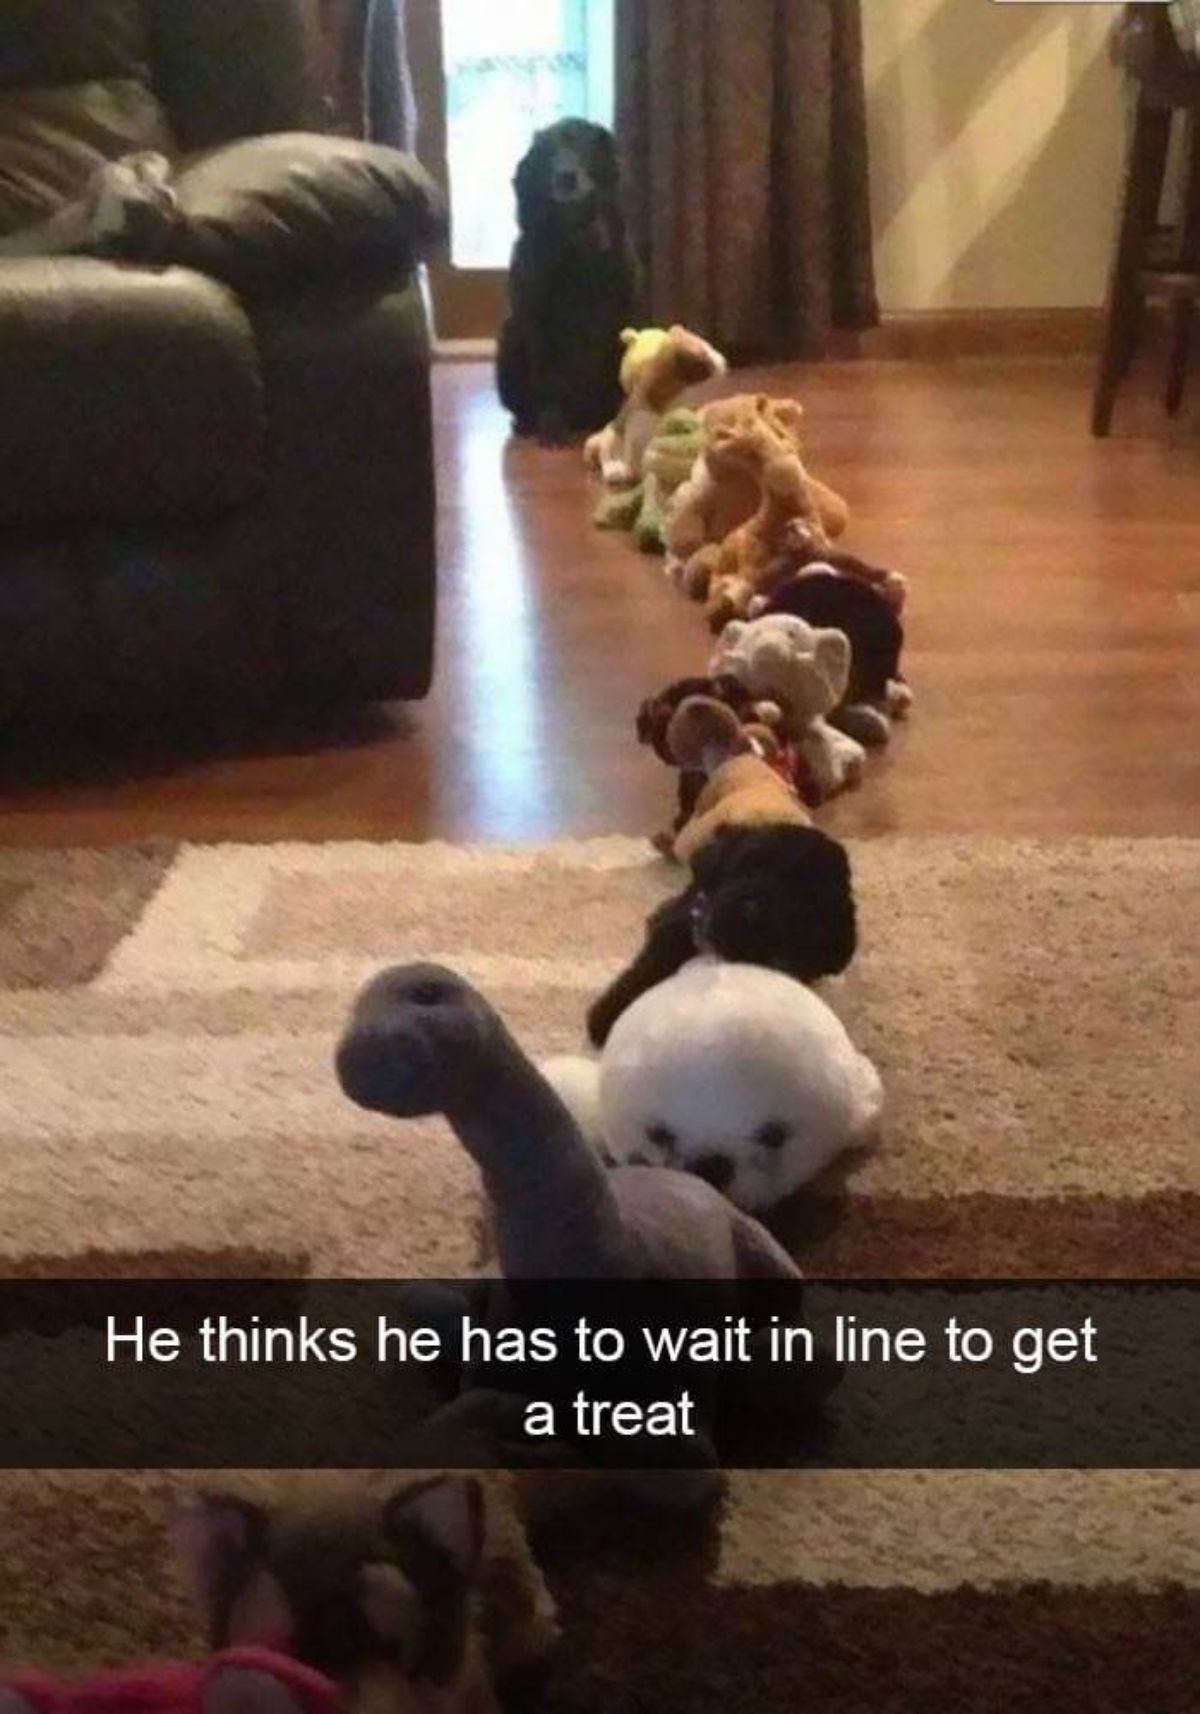 black dog sitting on the floor behind a long row of stuffed animals with a caption saying he thinks he has to wait in line to get a treat